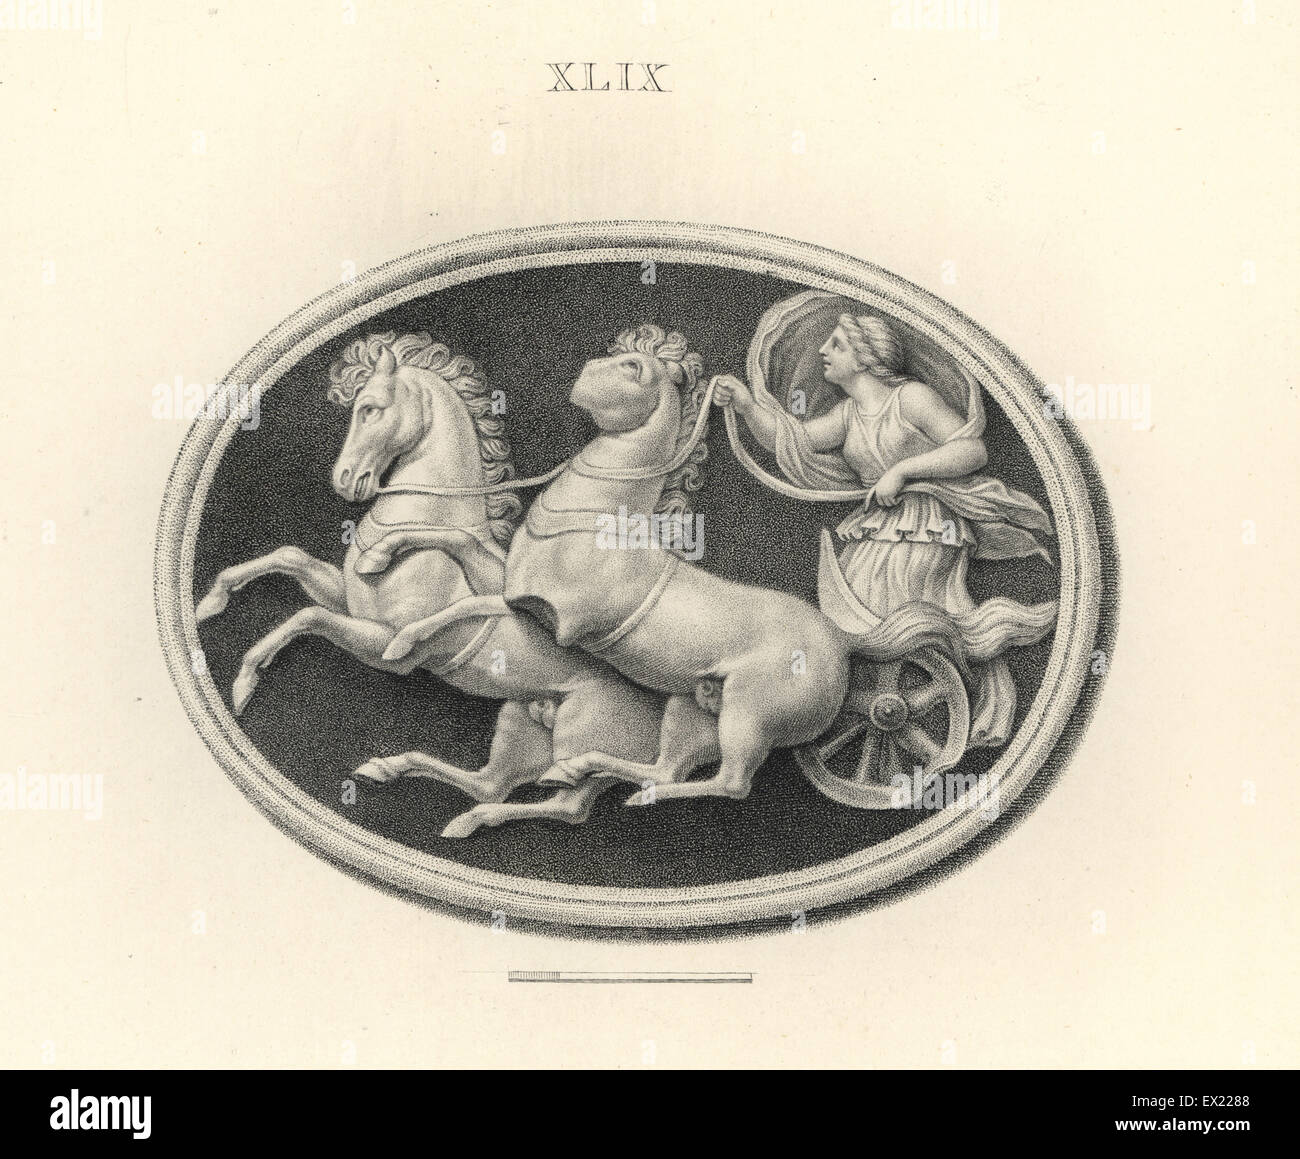 Female charioteer driving a two-horse chariot or biga in a race. Copperplate engraving by Francesco Bartolozzi from 108 Plates of Antique Gems, 1860. The gems were from the Duke of Marlborough's collection. Stock Photo